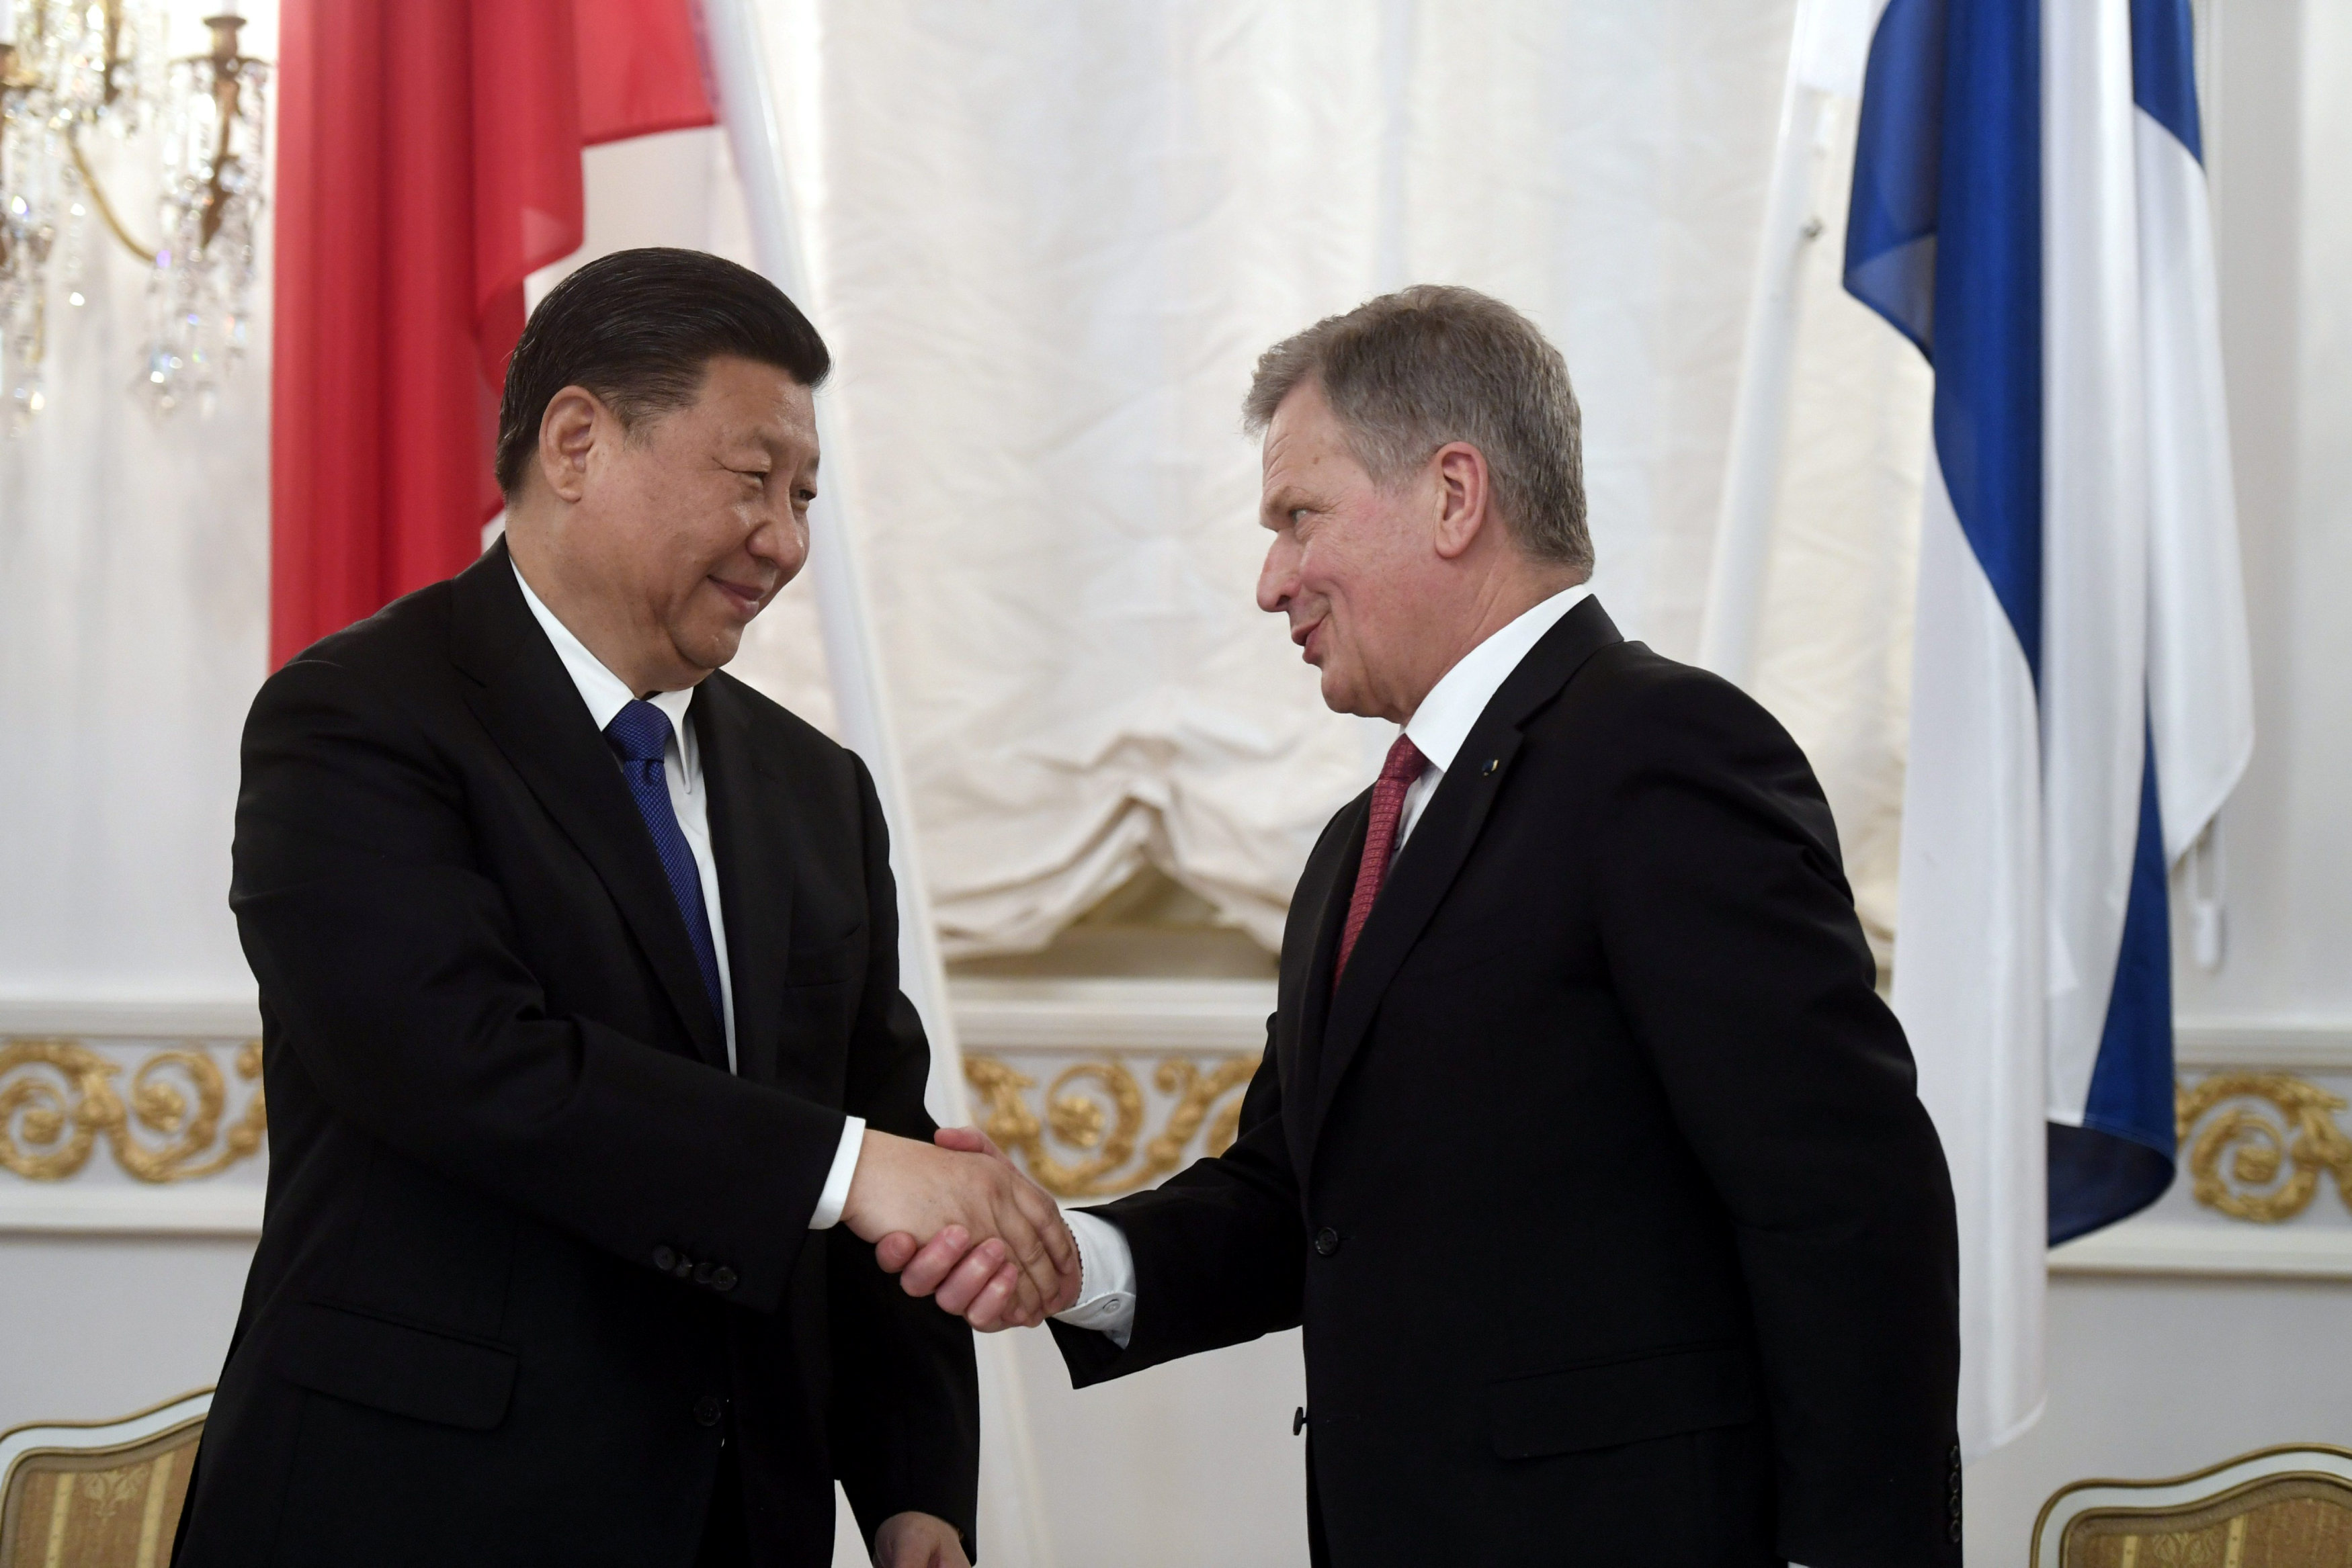 China's President Xi Jinping and Finland's President Sauli Niinisto shake hands during the signing ceremony at the Presidential Palace in Helsinki, Finland April 5, 2017. Lehtikuva/Vesa Moilanen/via REUTERS